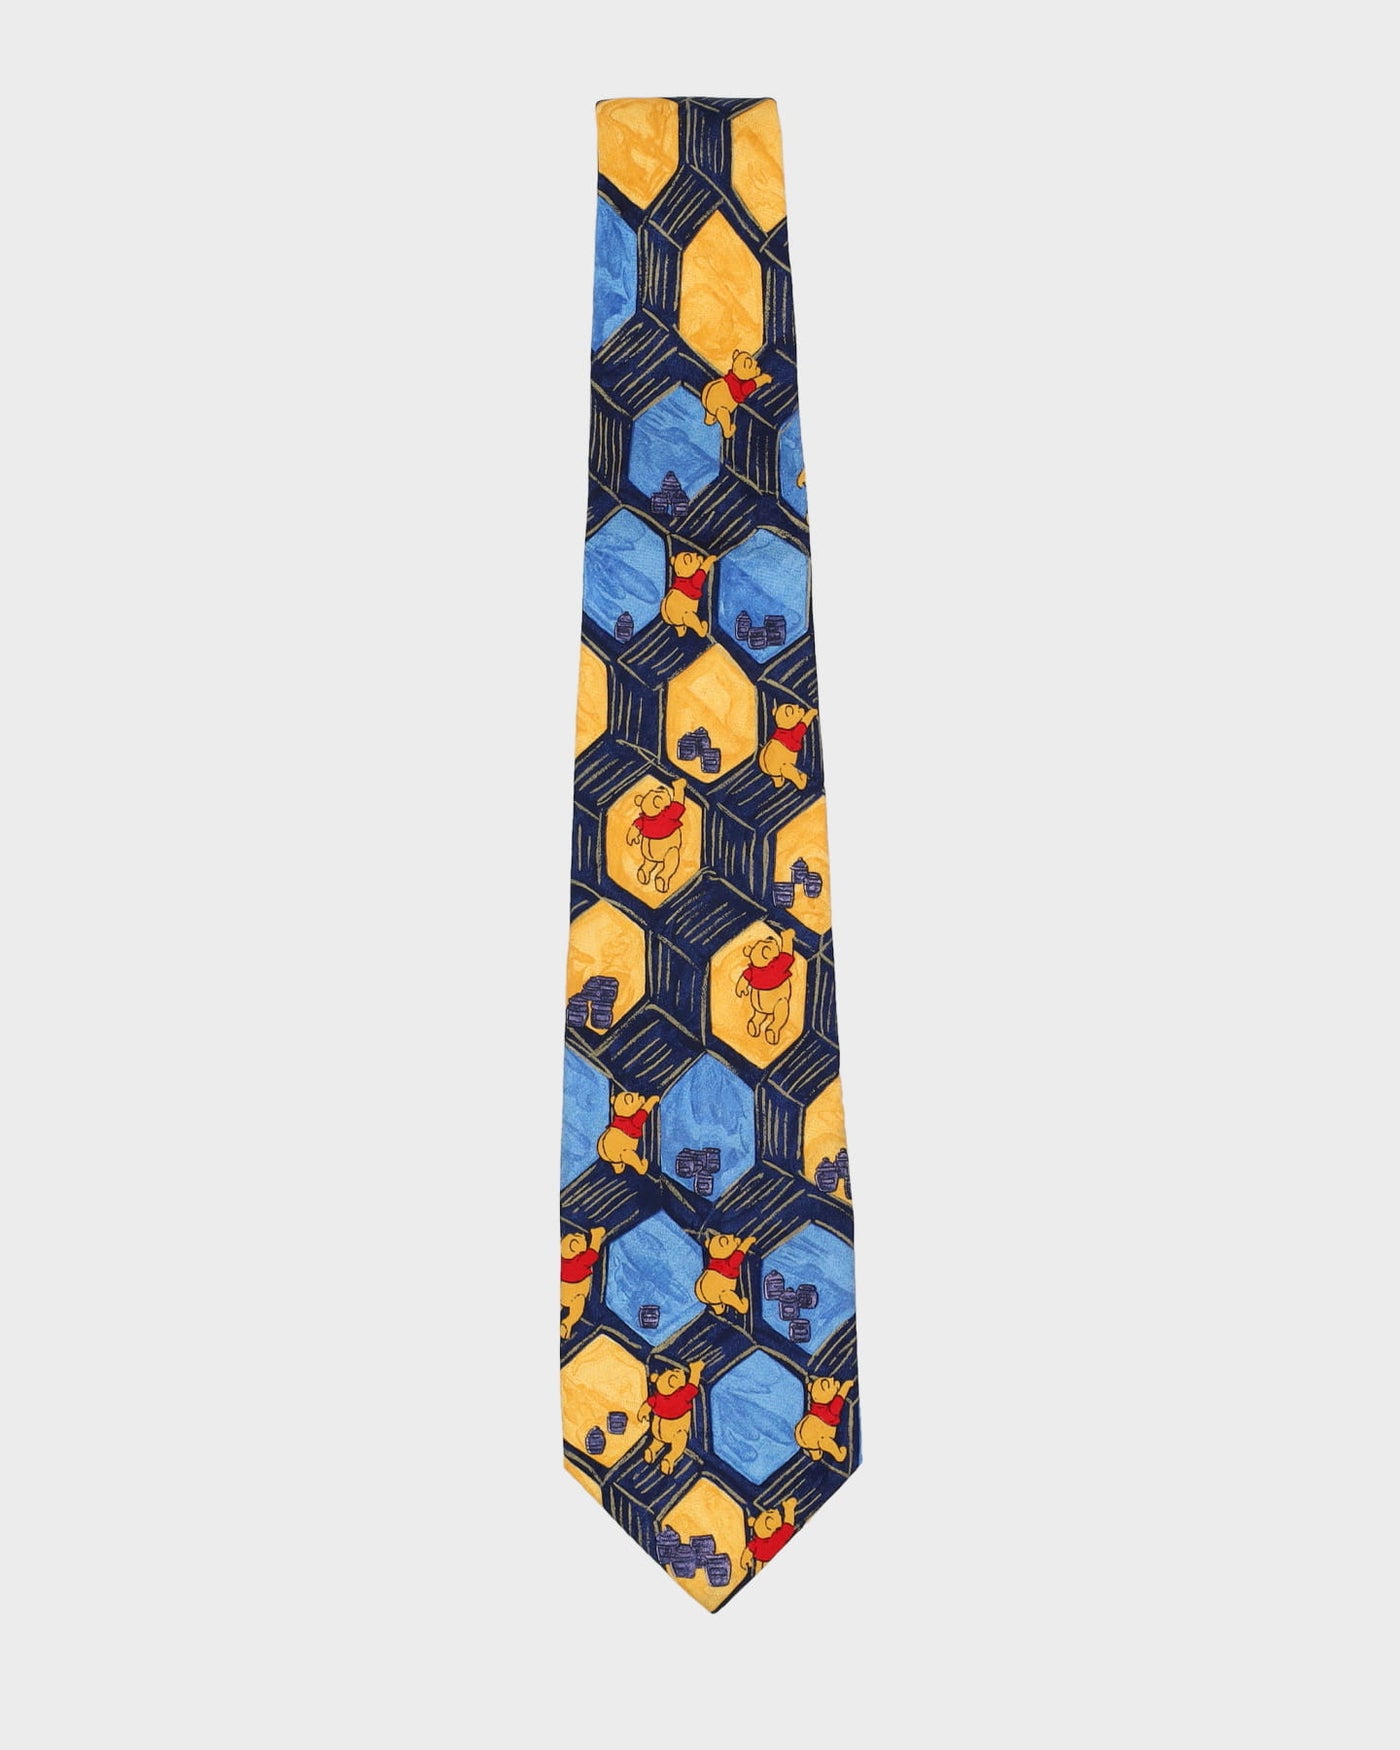 Vintage 90s Winnie The Pooh Blue / Yellow Patterned Tie